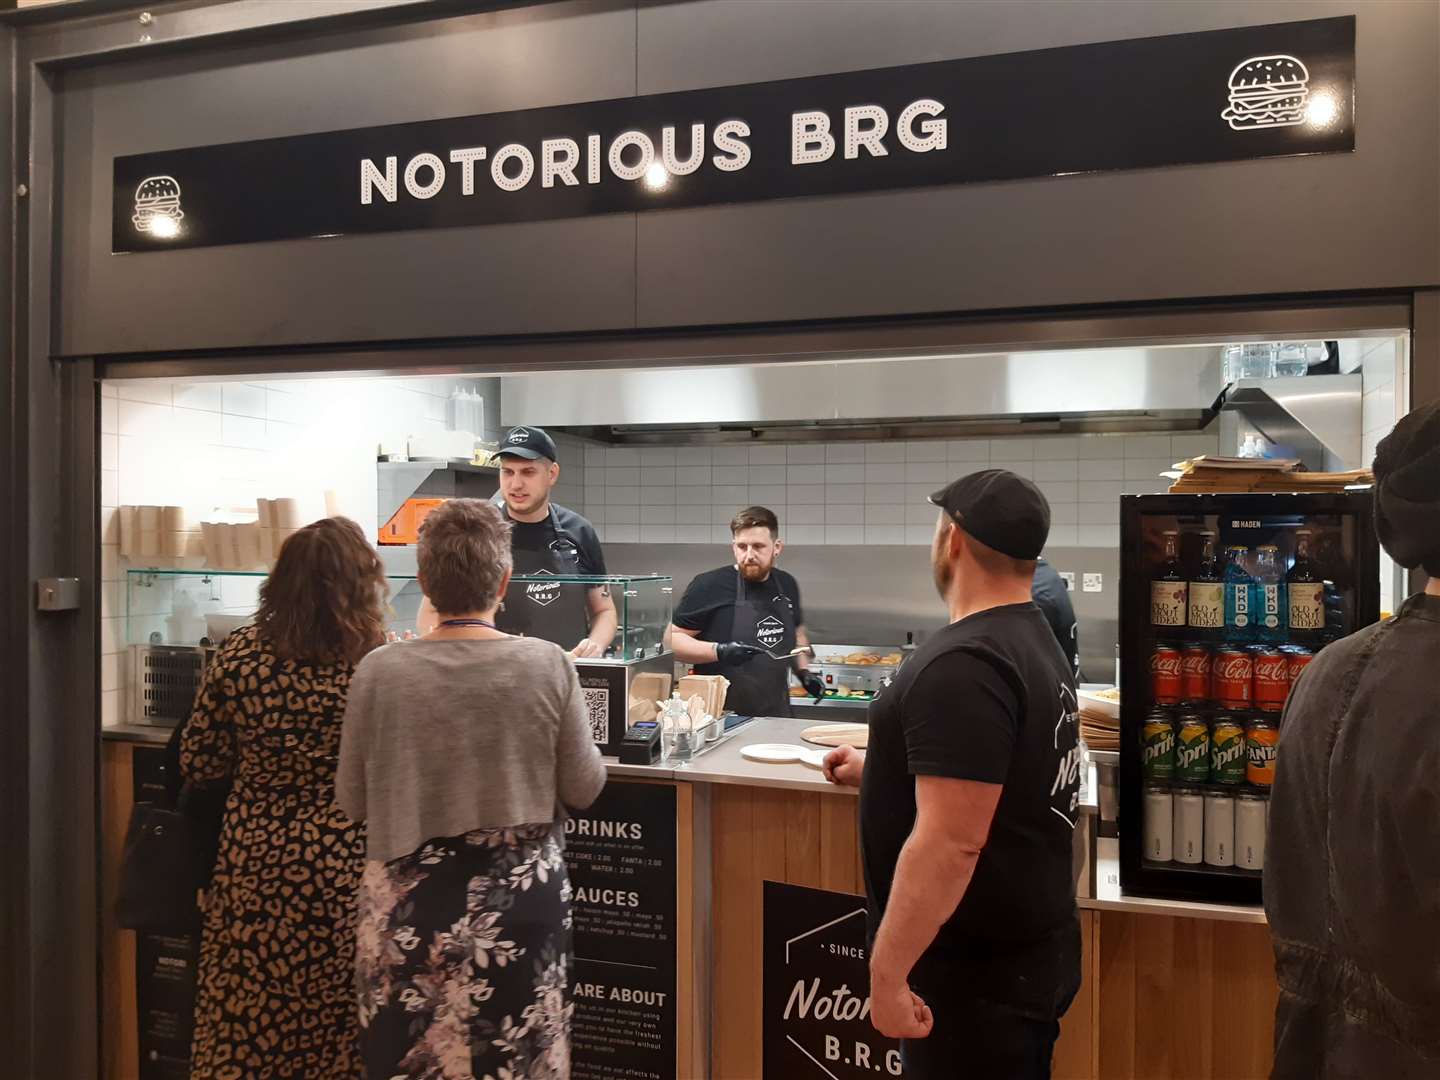 The Notorious BRG unit at the Maidstone Food Hall